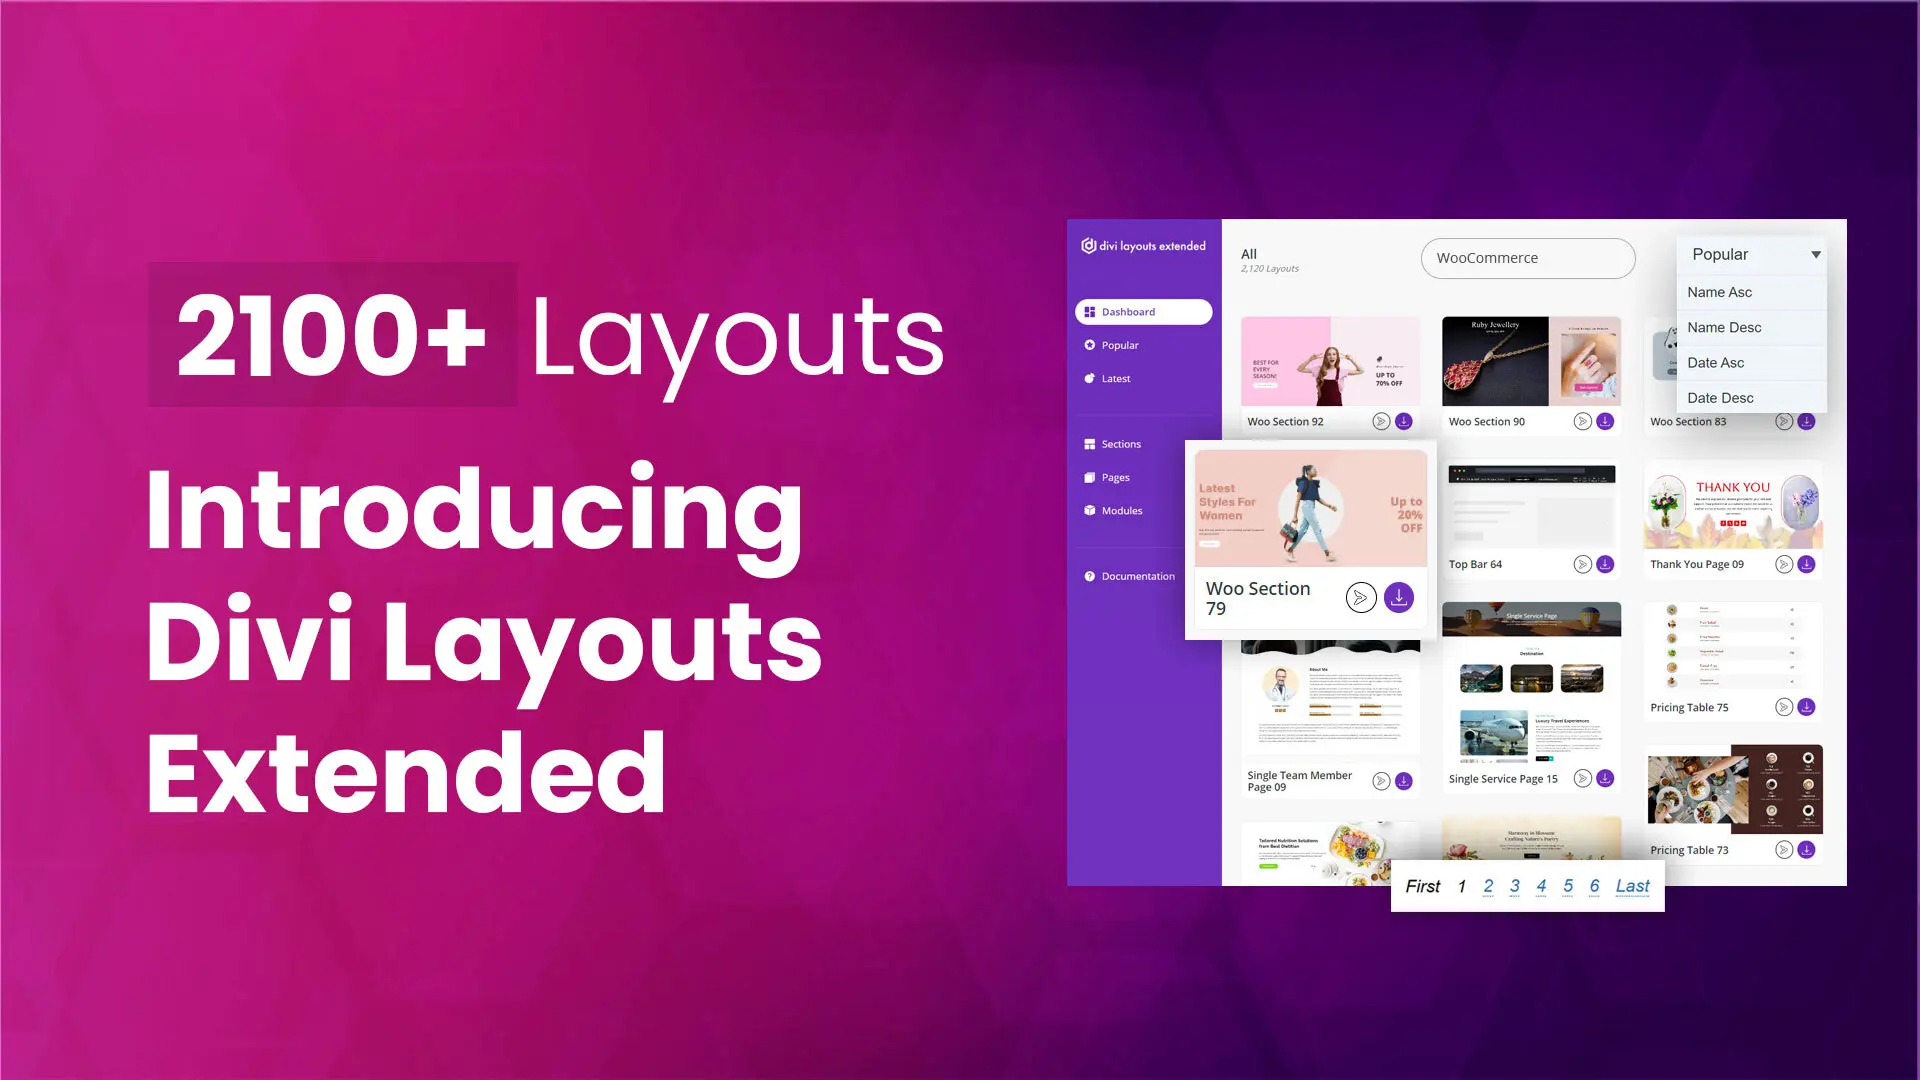 2100+ layouts of Divi Layouts Extended